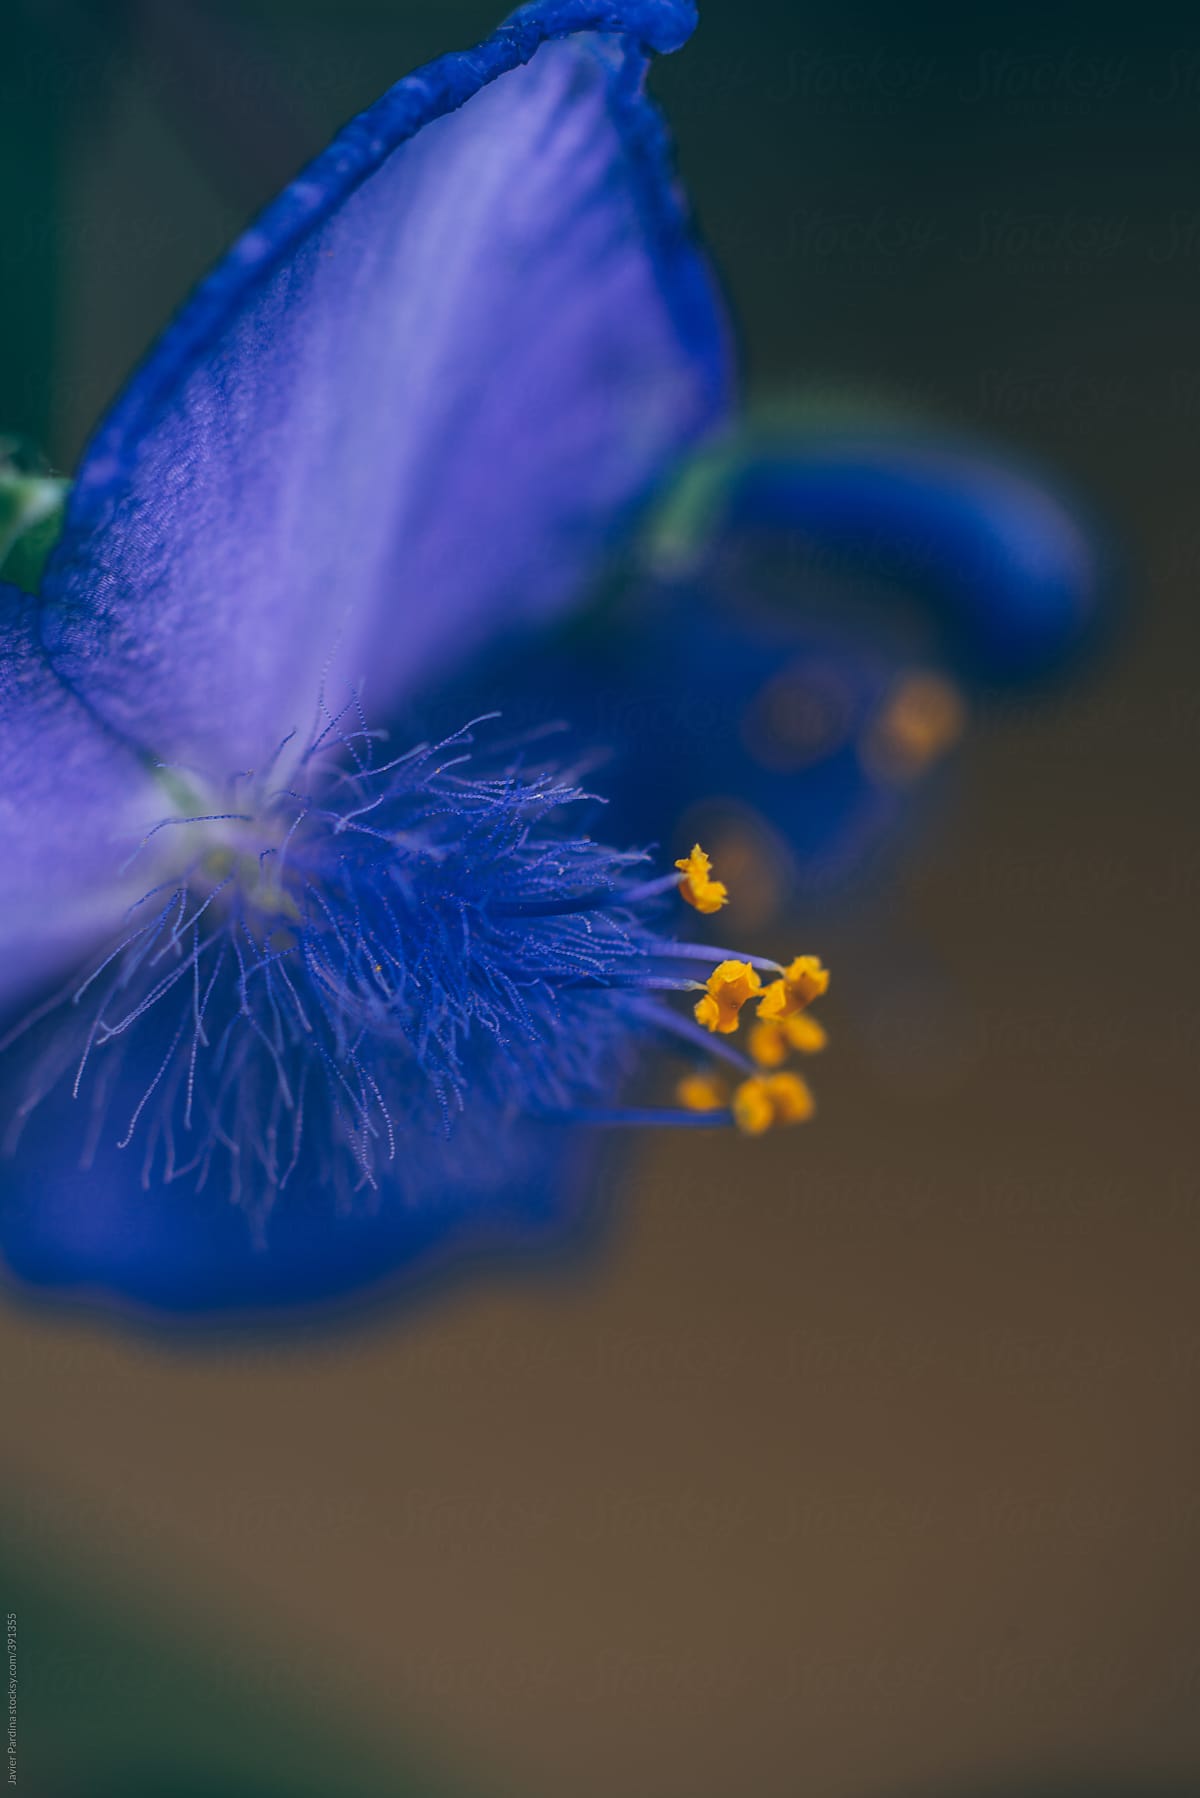 Details of blue plants and flowers.